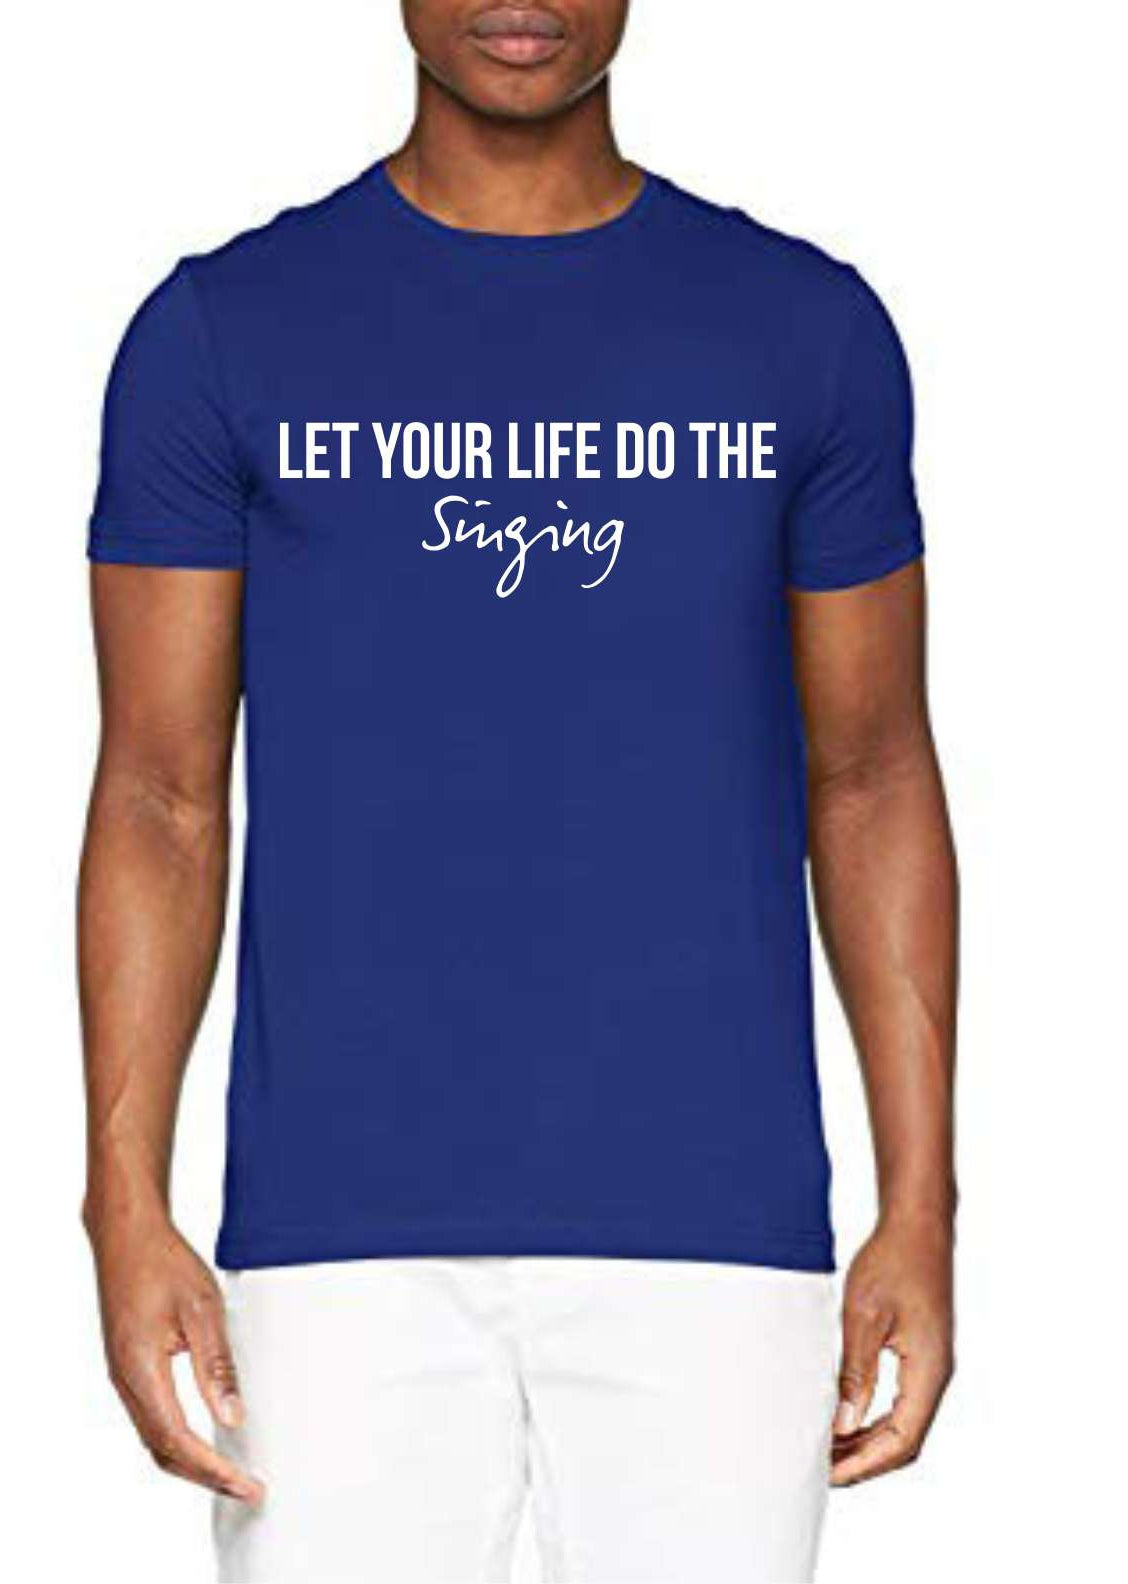 Let Your Life Do The Singing (Royal Blue & White)